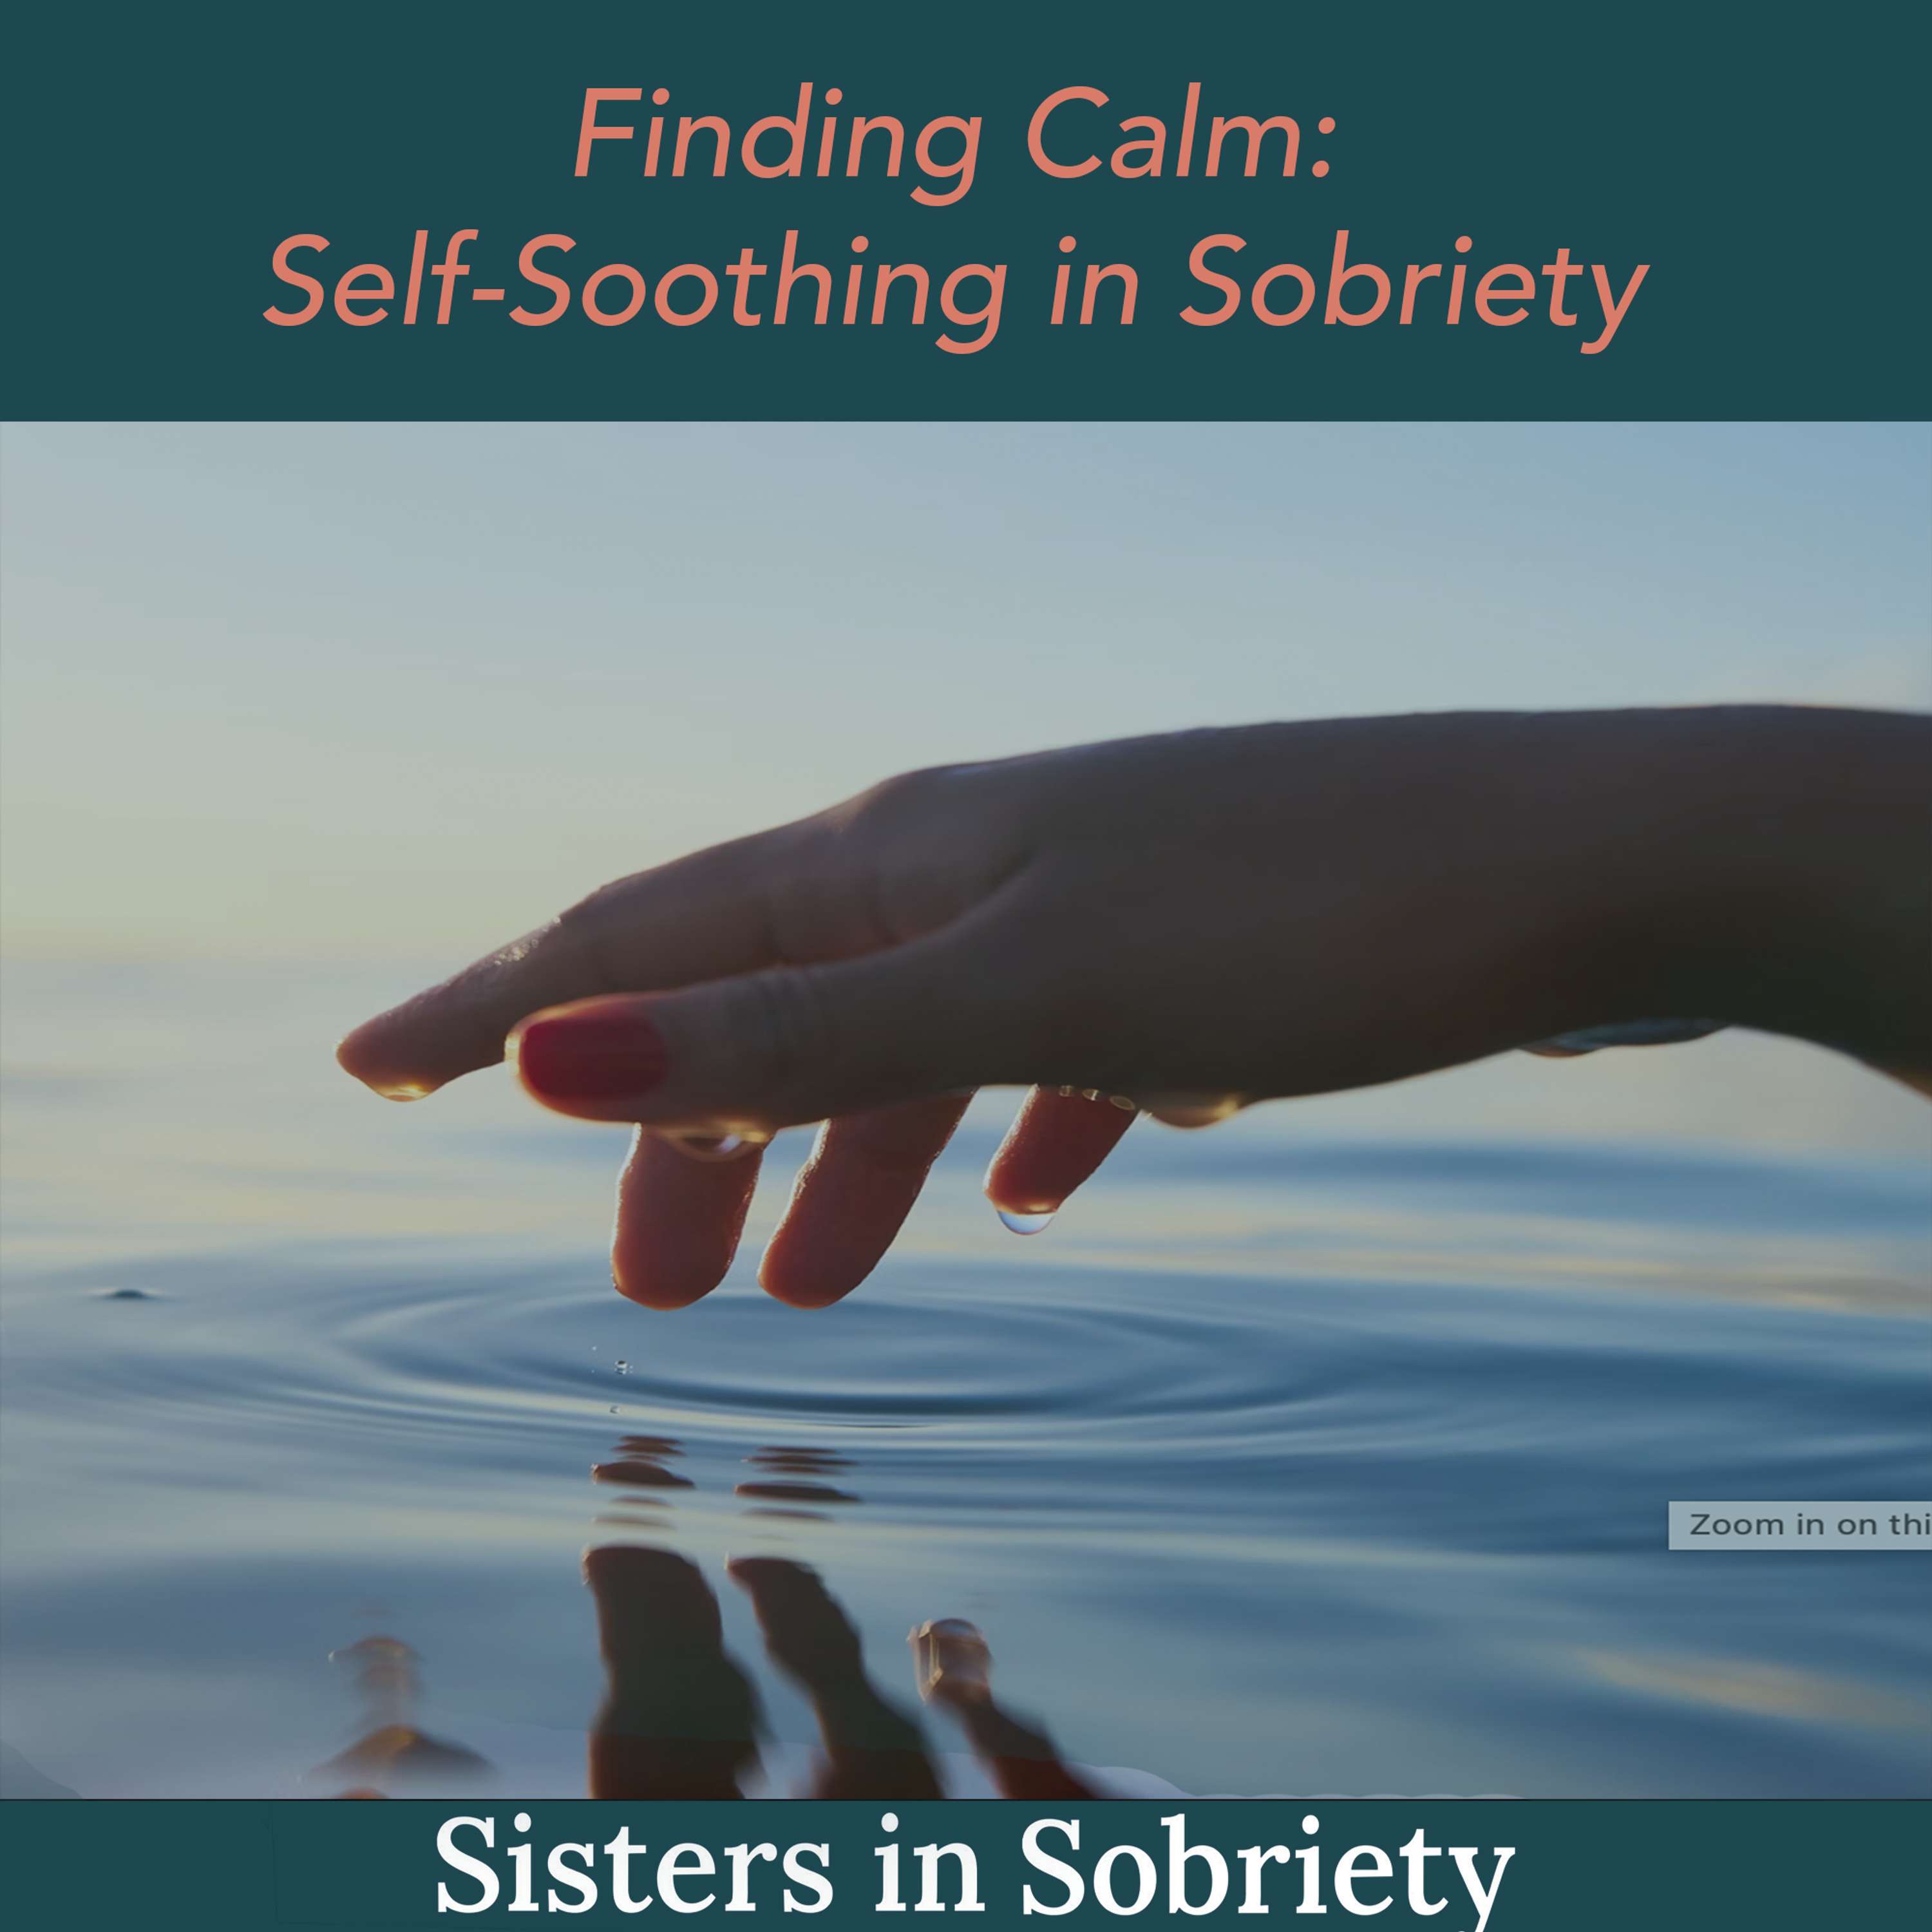 Finding Calm: Self-Soothing in Sobriety